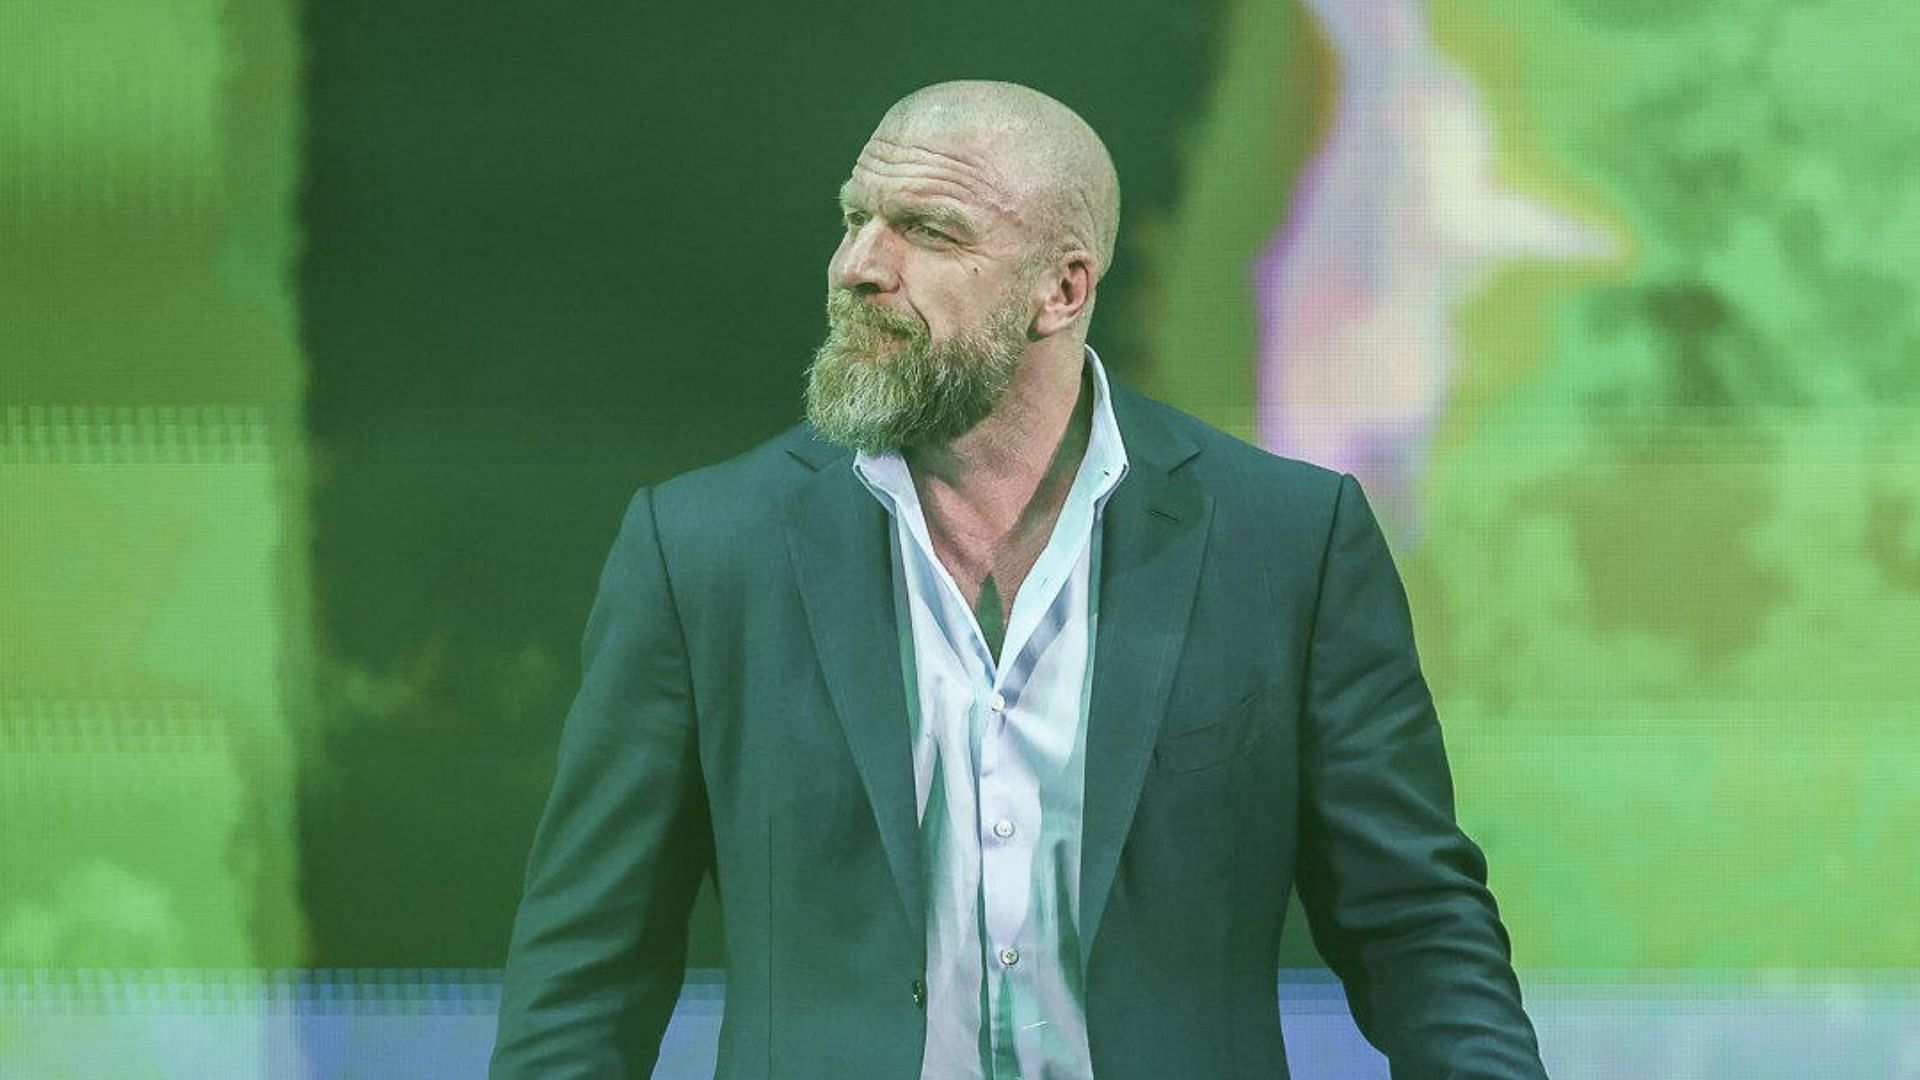 Triple H may have big plans for WrestleMania